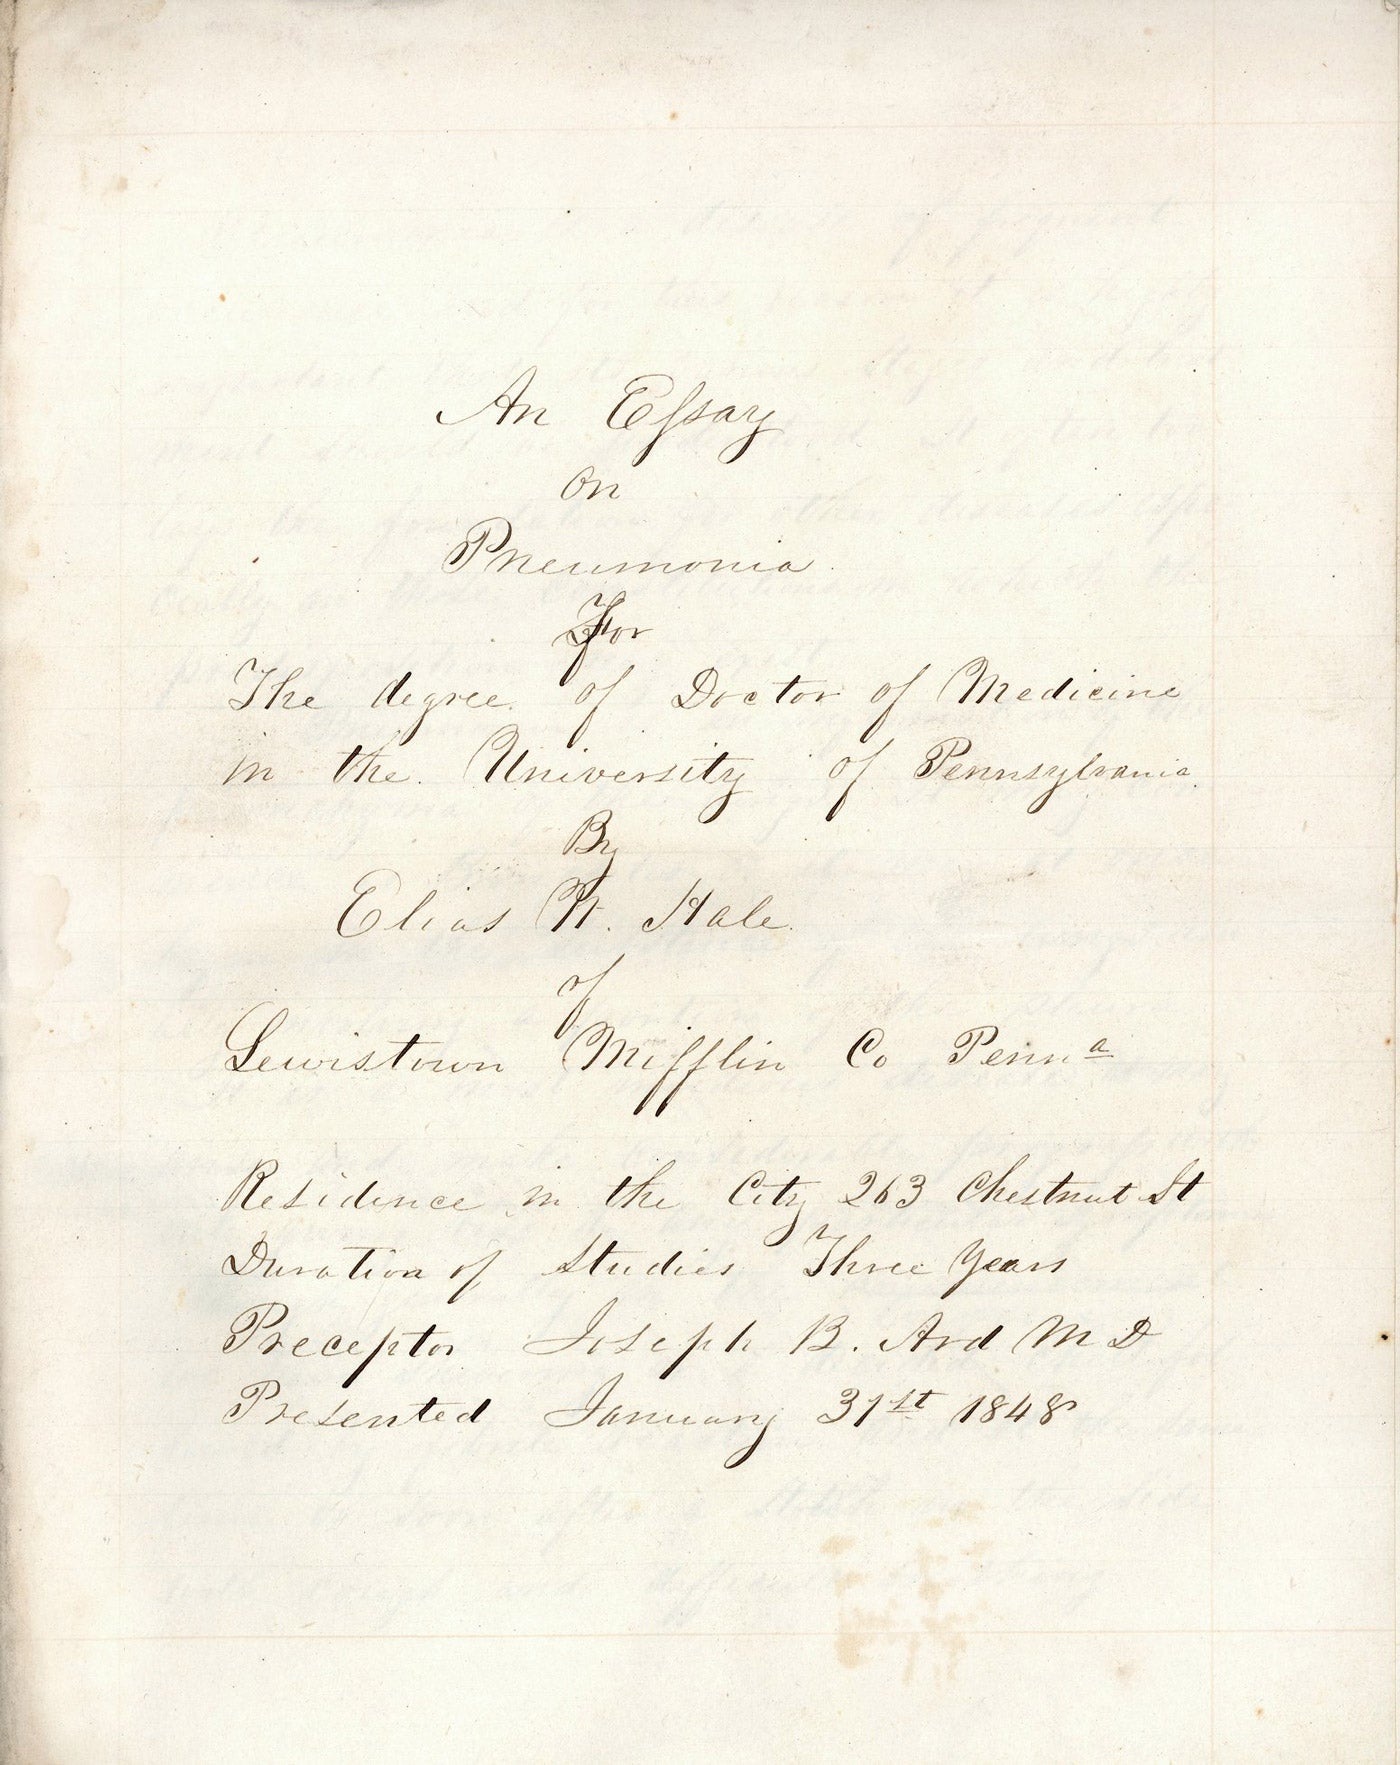 Cover of handwritten essay titled An Essay on Pneumonia by Elias White Hale, 1848